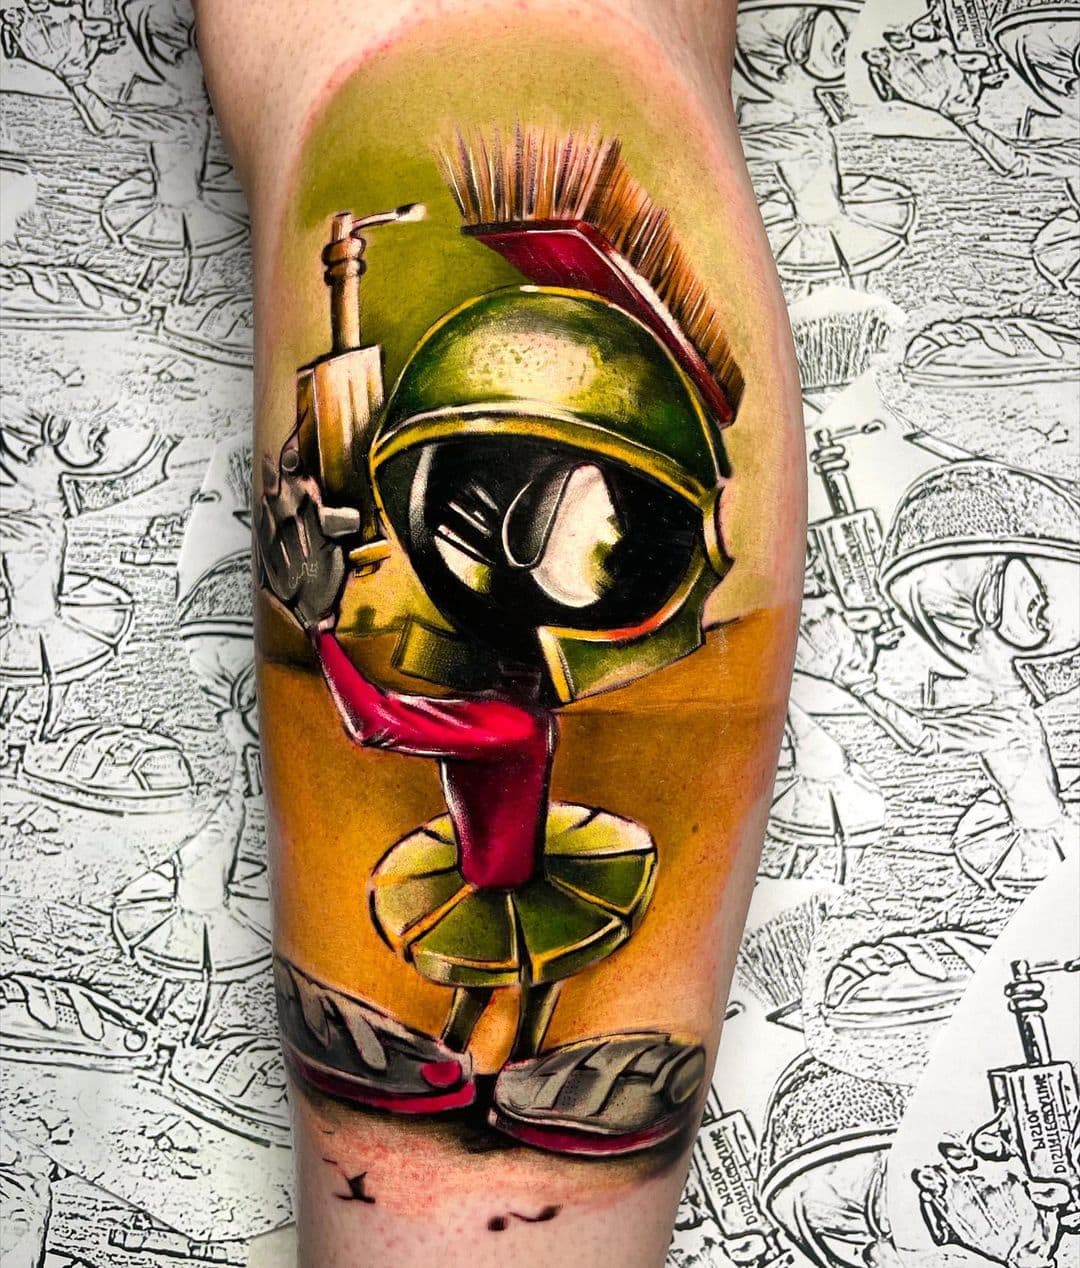 Marvin the Martian SemiPermanent Tattoo Lasts 12 weeks Painless and  easy to apply Organic ink Browse more or create your own  Inkbox   SemiPermanent Tattoos